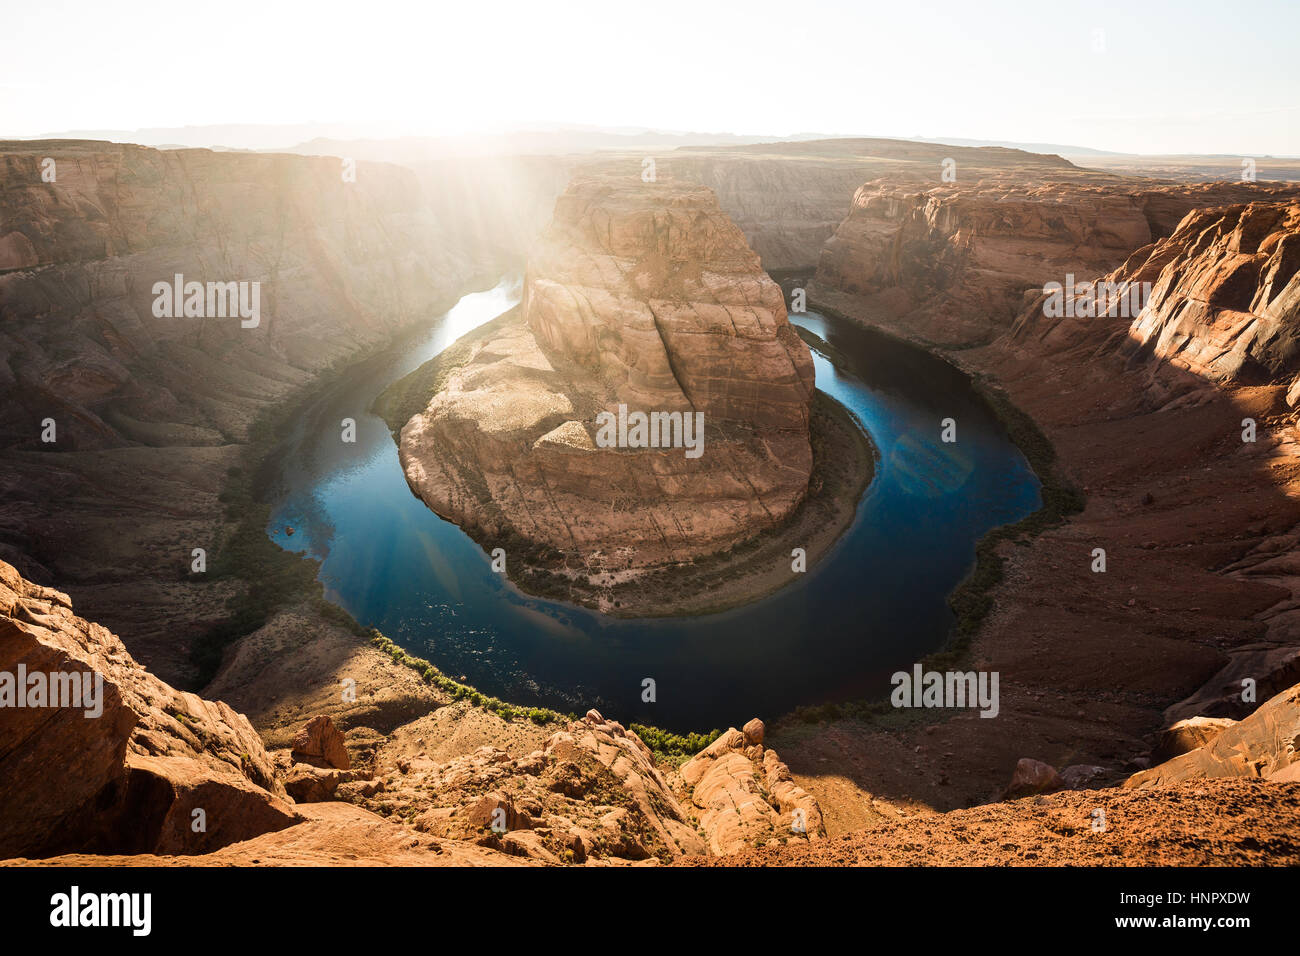 Classic wide-angle view of famous Horseshoe Bend, a horseshoe-shaped meander of the Colorado River in beautiful evening light at sunset, Arizona, USA Stock Photo